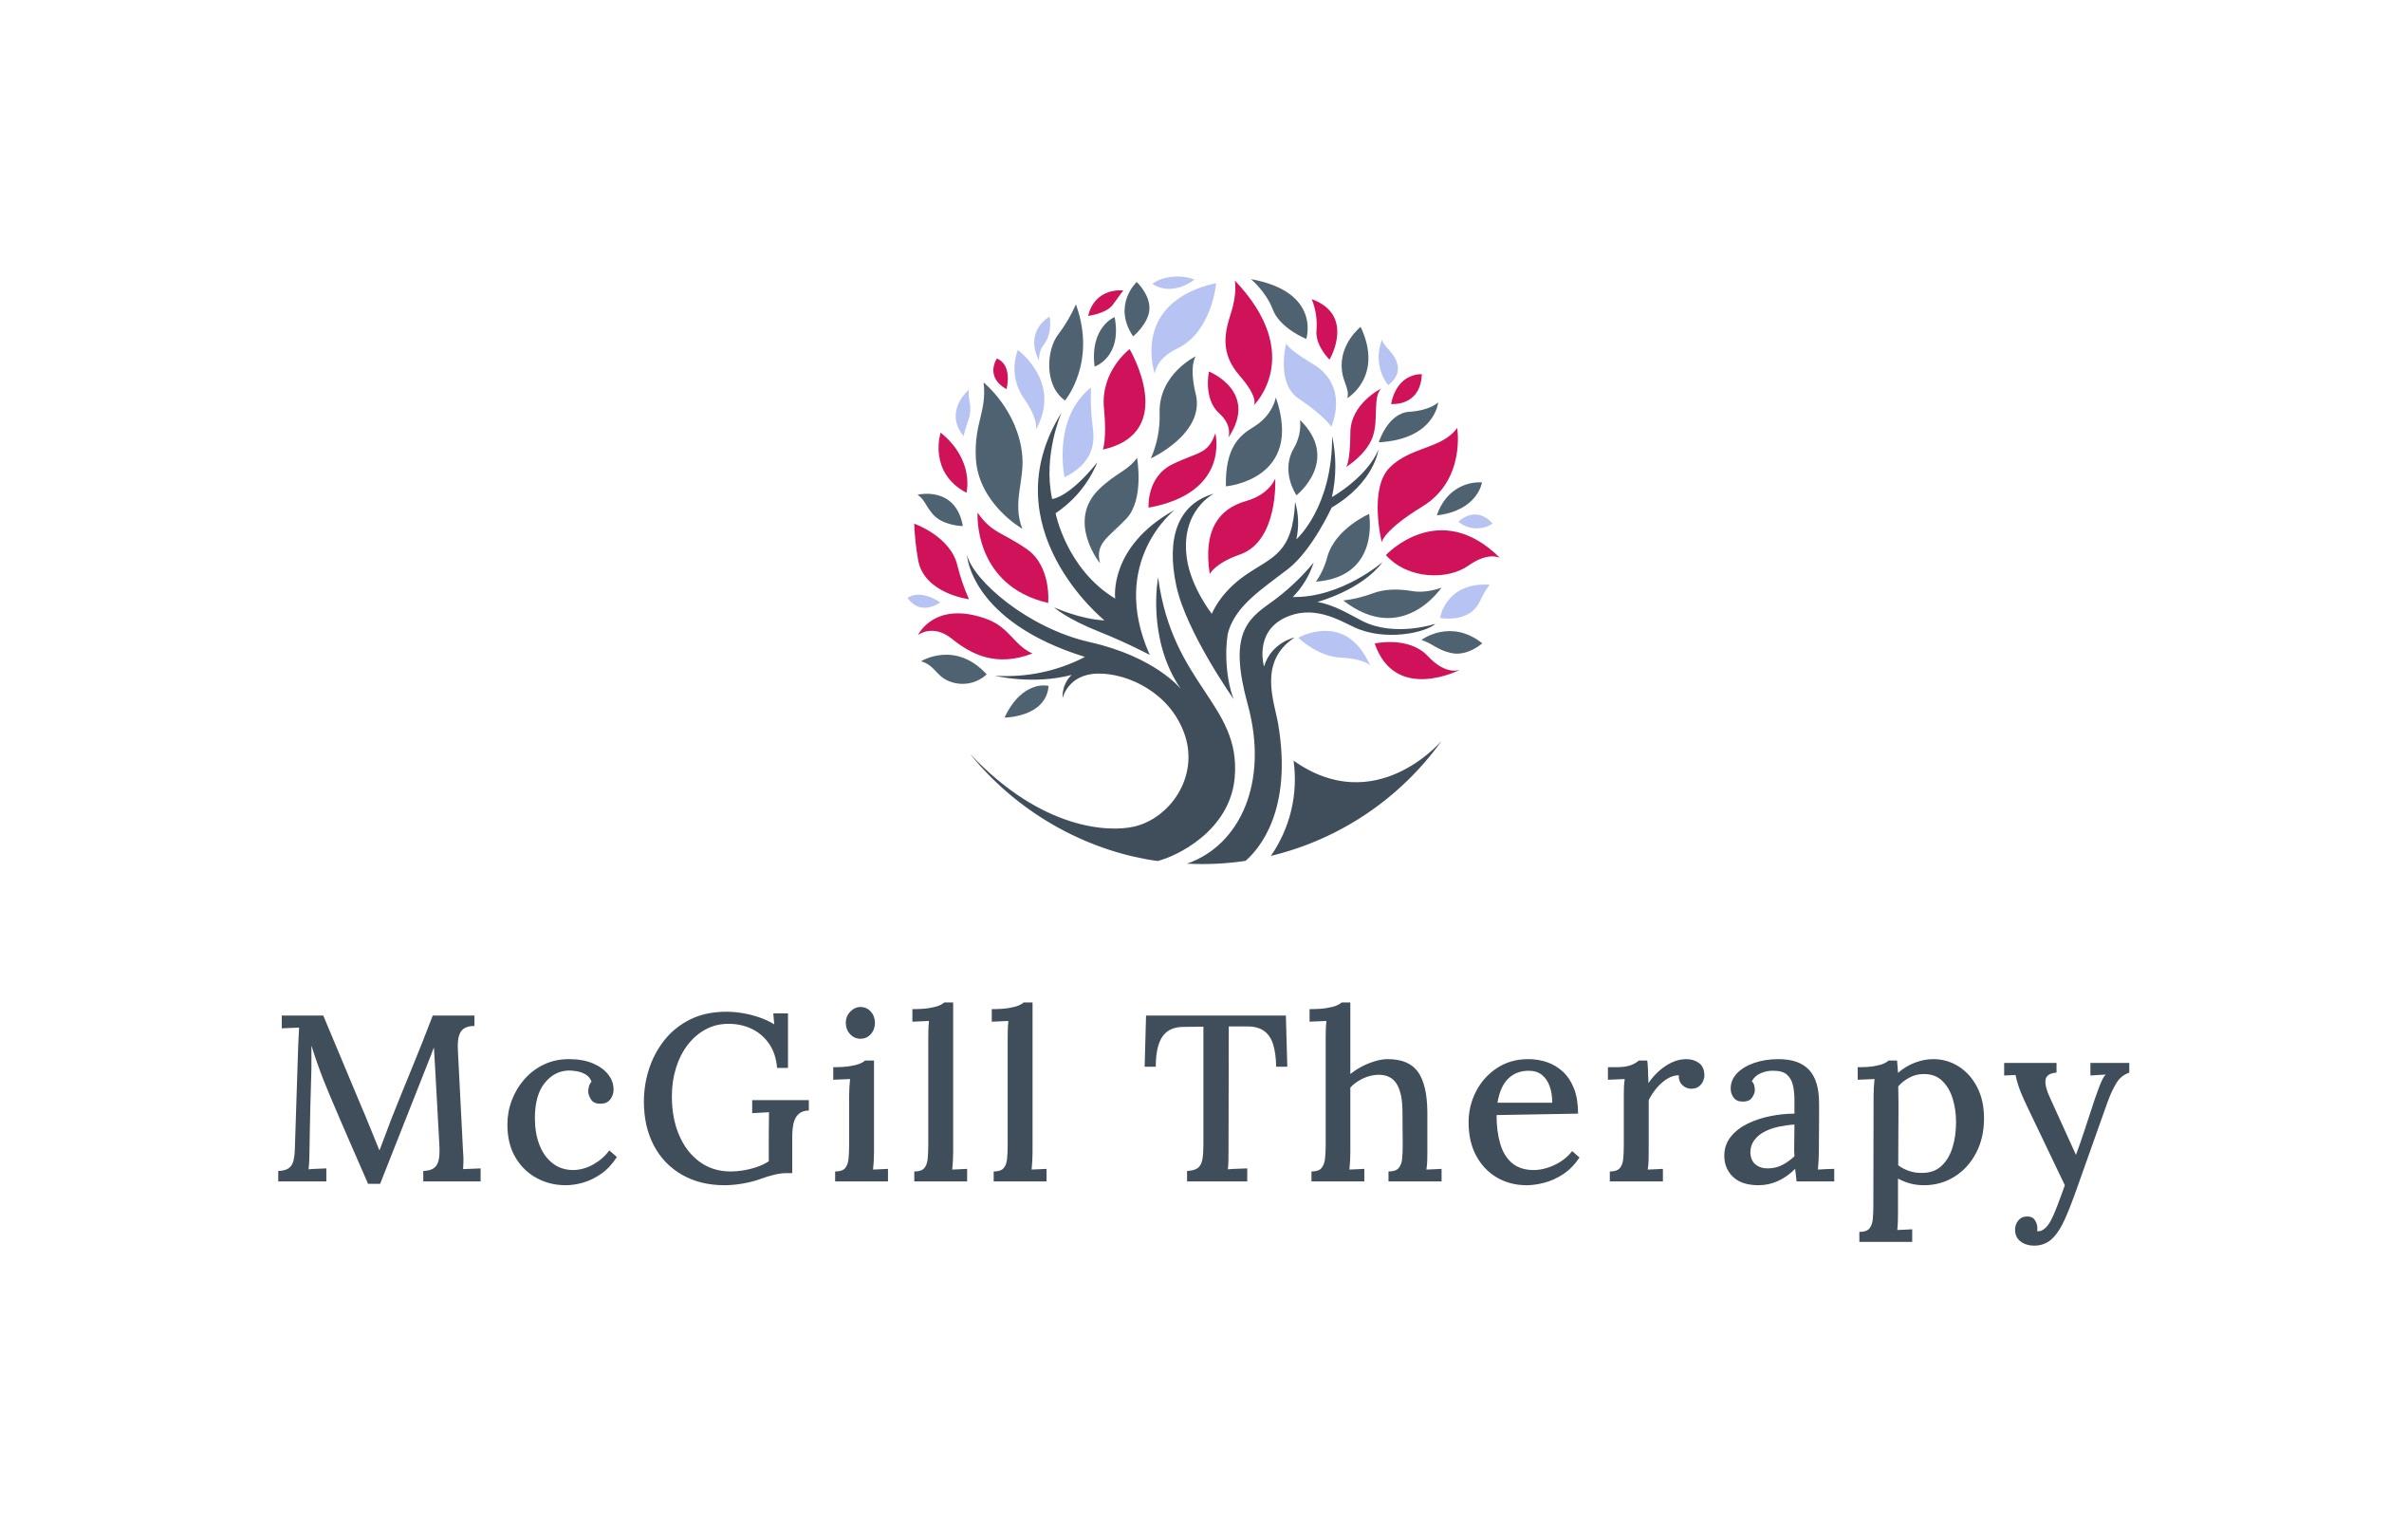 McGill Therapy